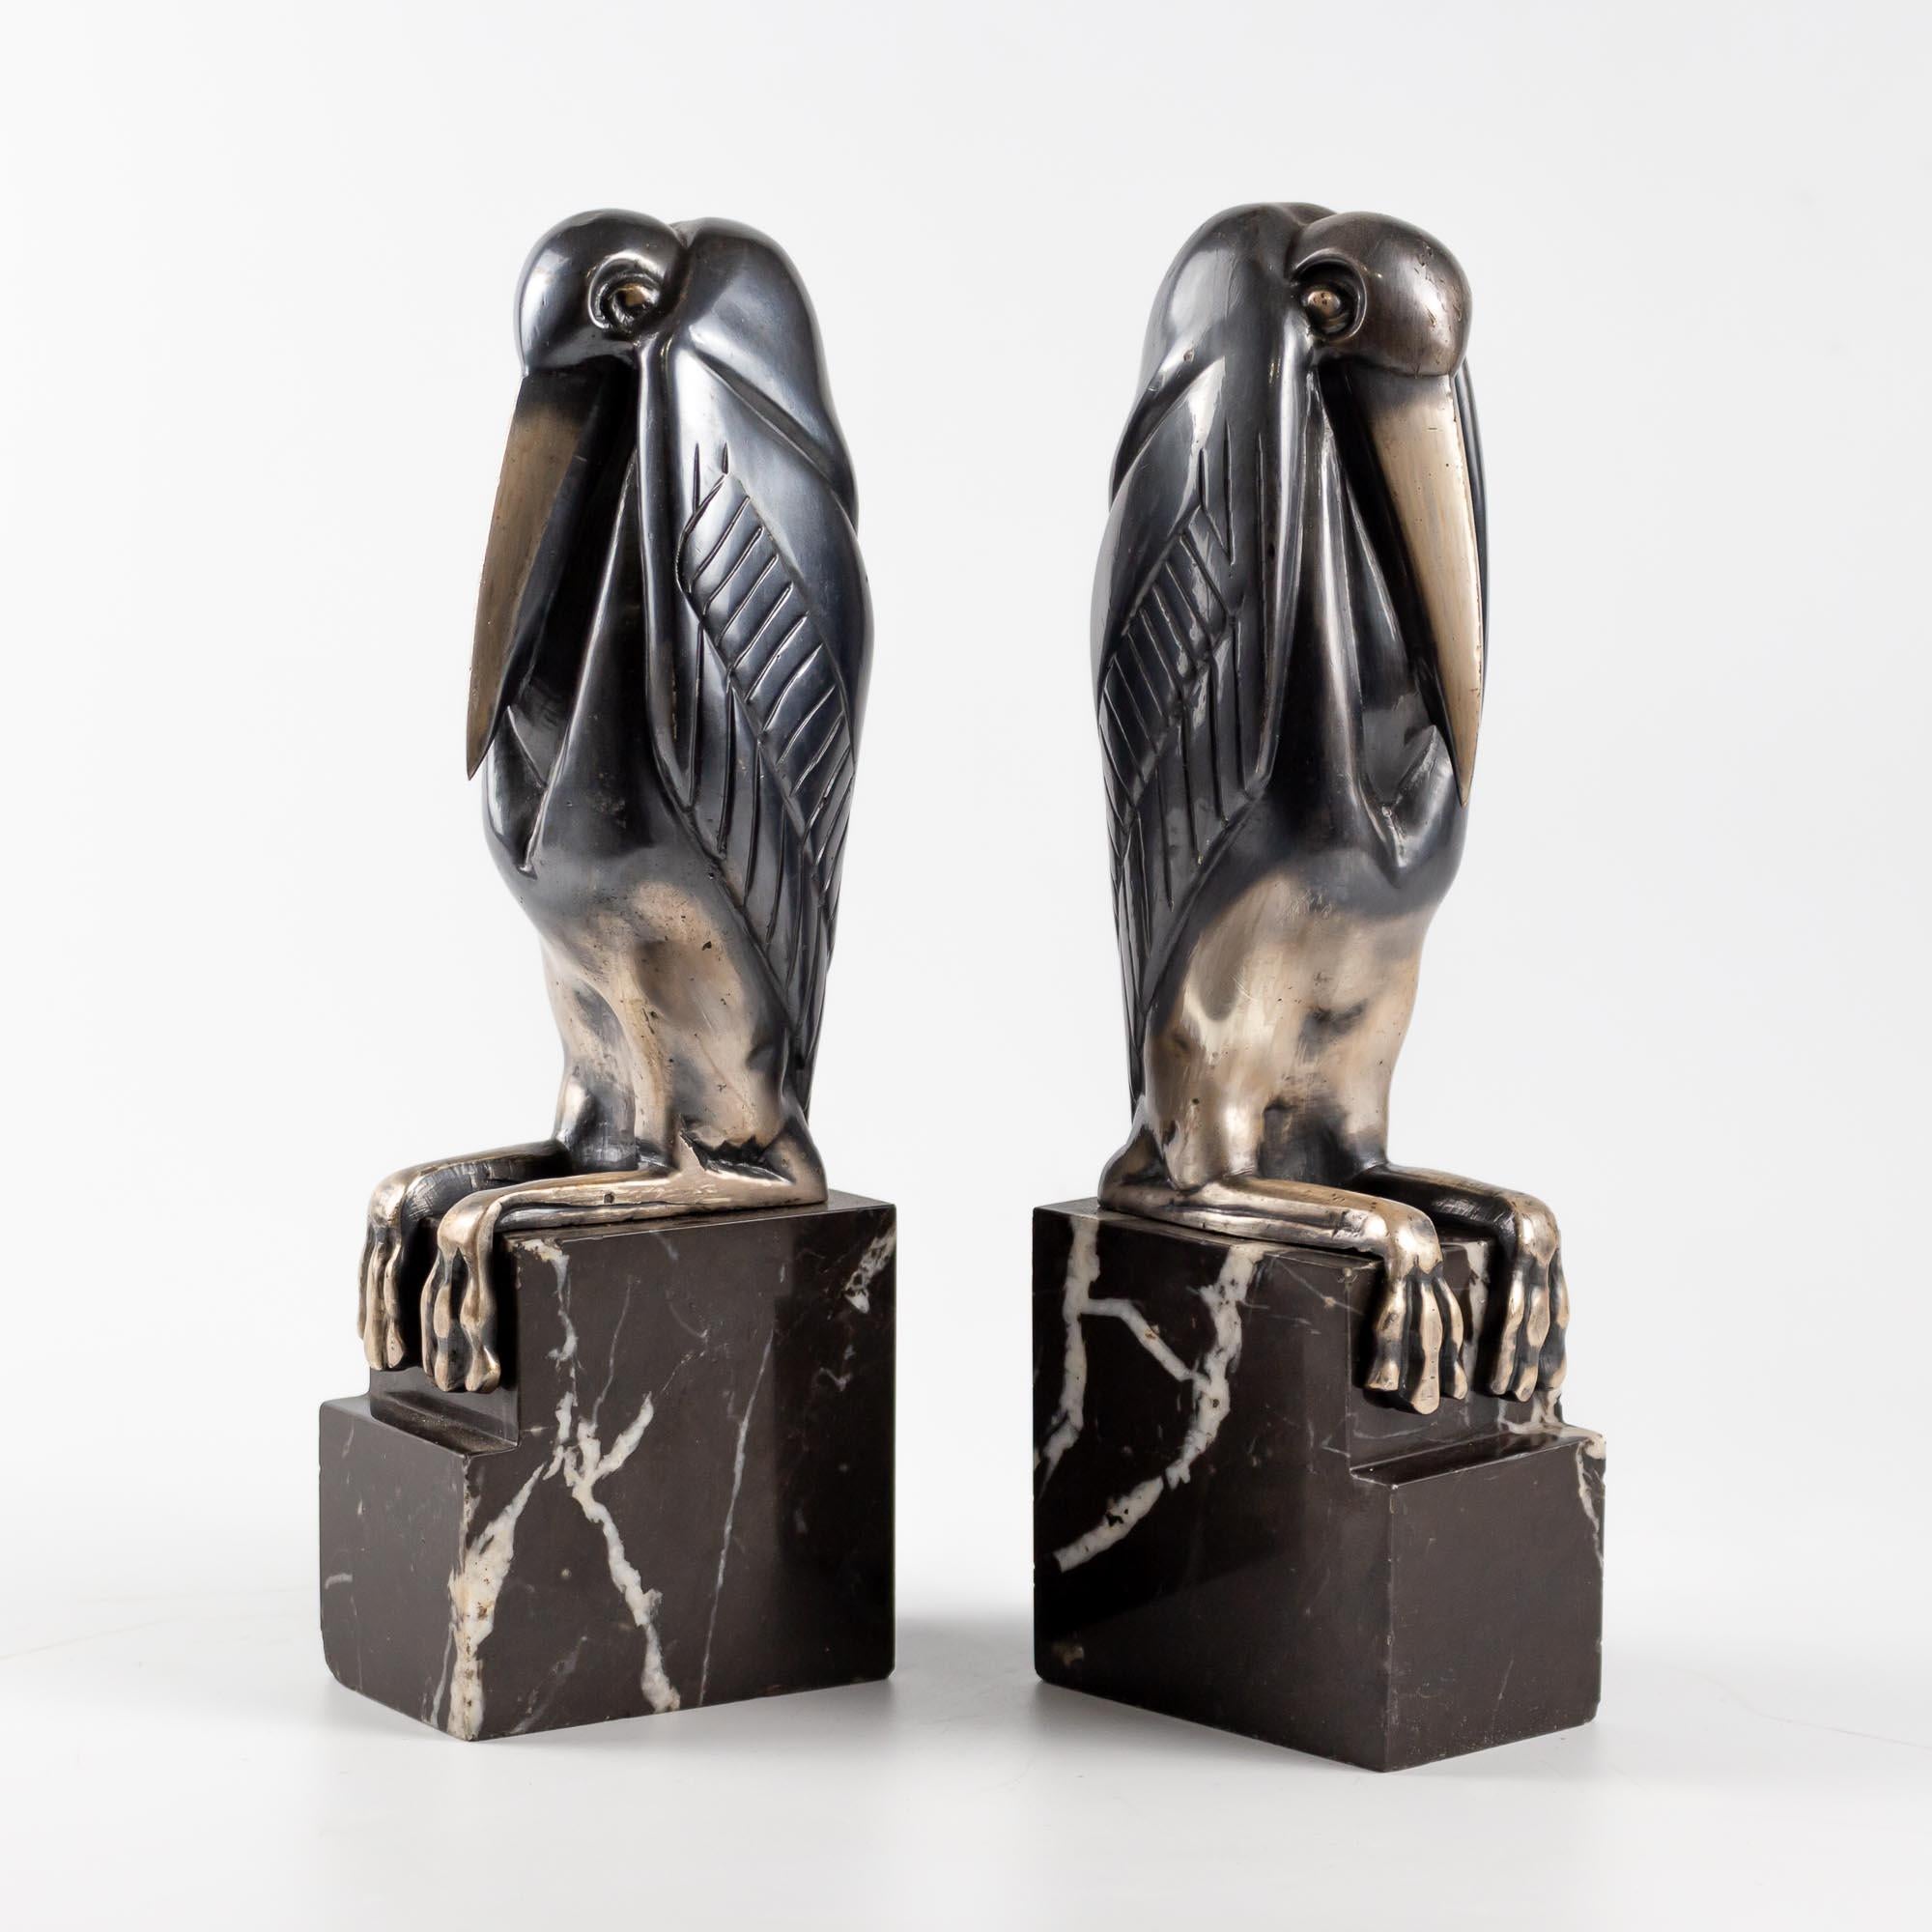 
A pair of Art Deco silvered and patinated bronze  bookends by Marcel-Andre Bouraine, circa 1930, modelled as seated Marabou Storks, on stepped marble bases, signed  'A.Bouraine', the underside of one base

We enclose a certificate of authenticity